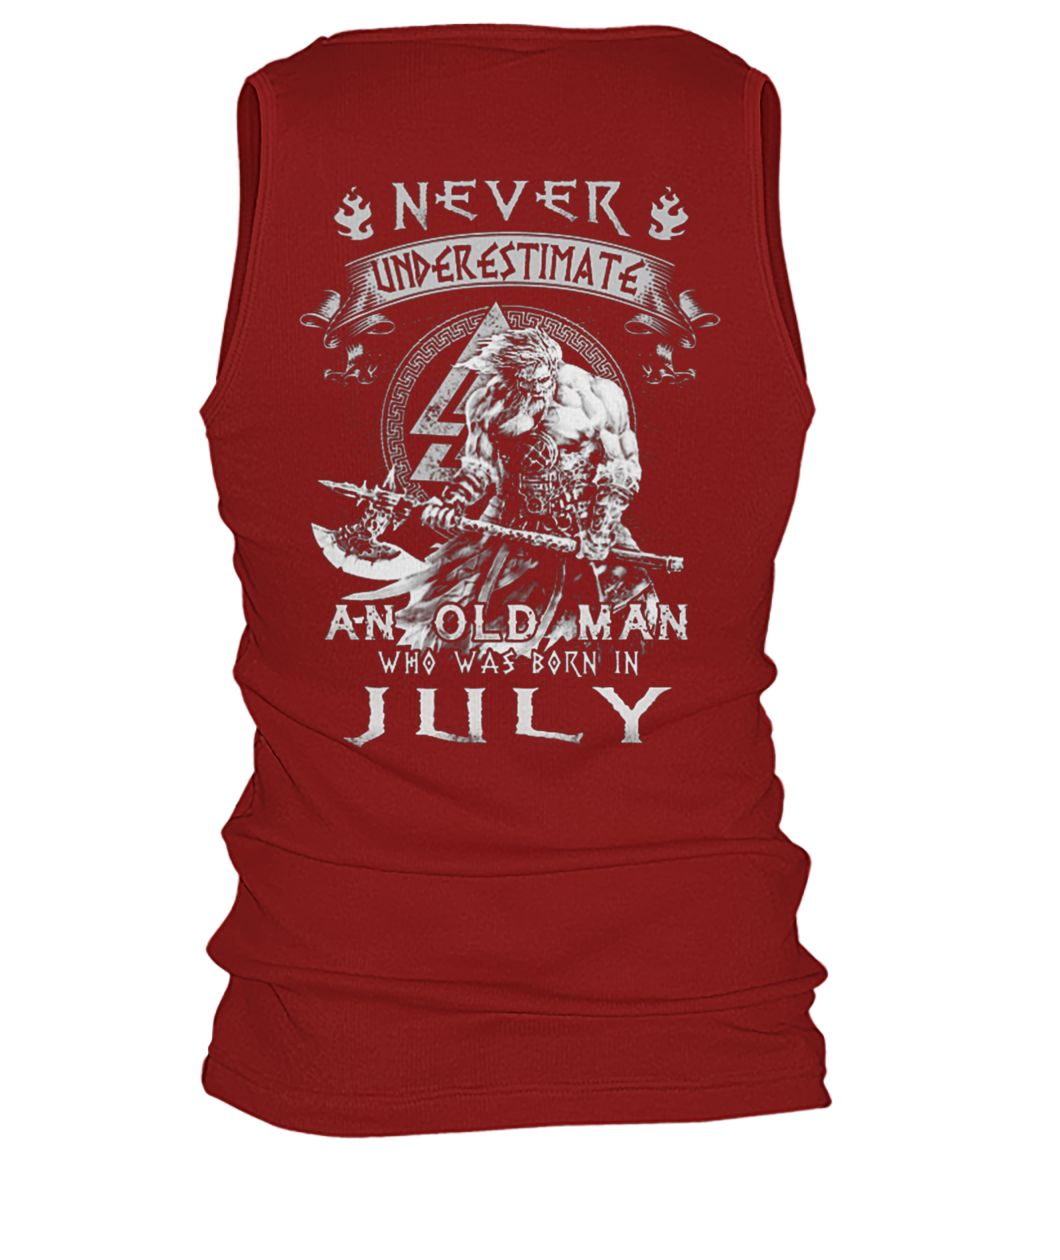 Never underestimate an old man who was born in july men's tank top